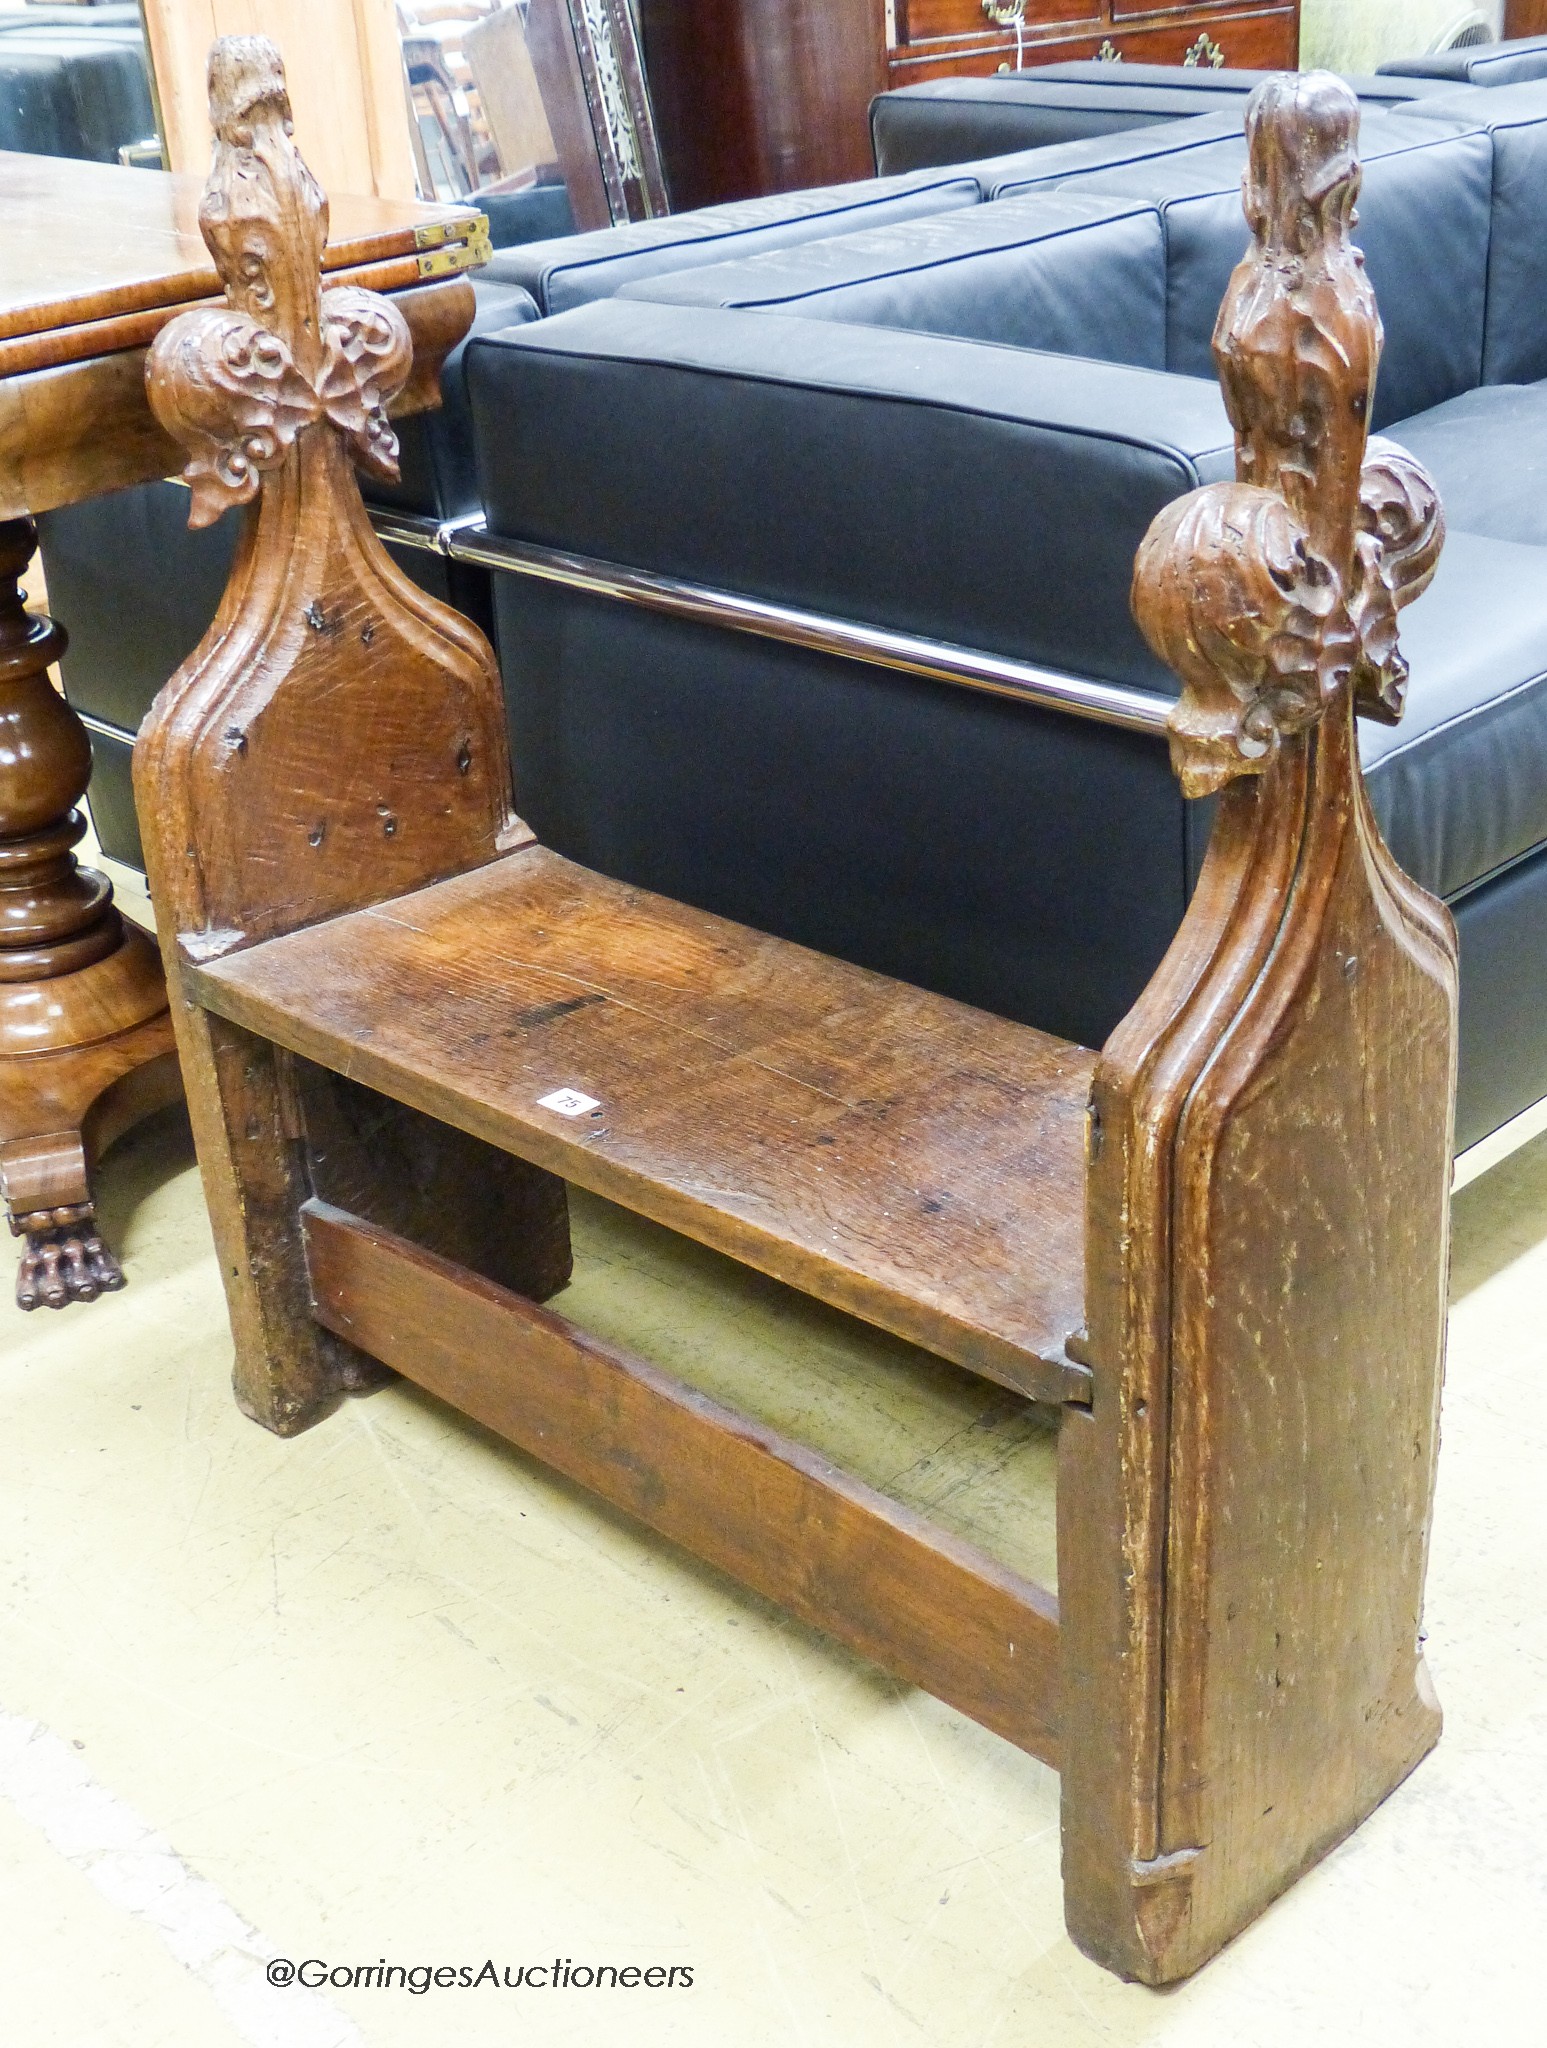 A pair of 15th century oak pew ends with stylised leaf and berry fleur-de-lys finials, joined by a later bench seat, length 85cm, depth 27cm, height 92cm                                                                   